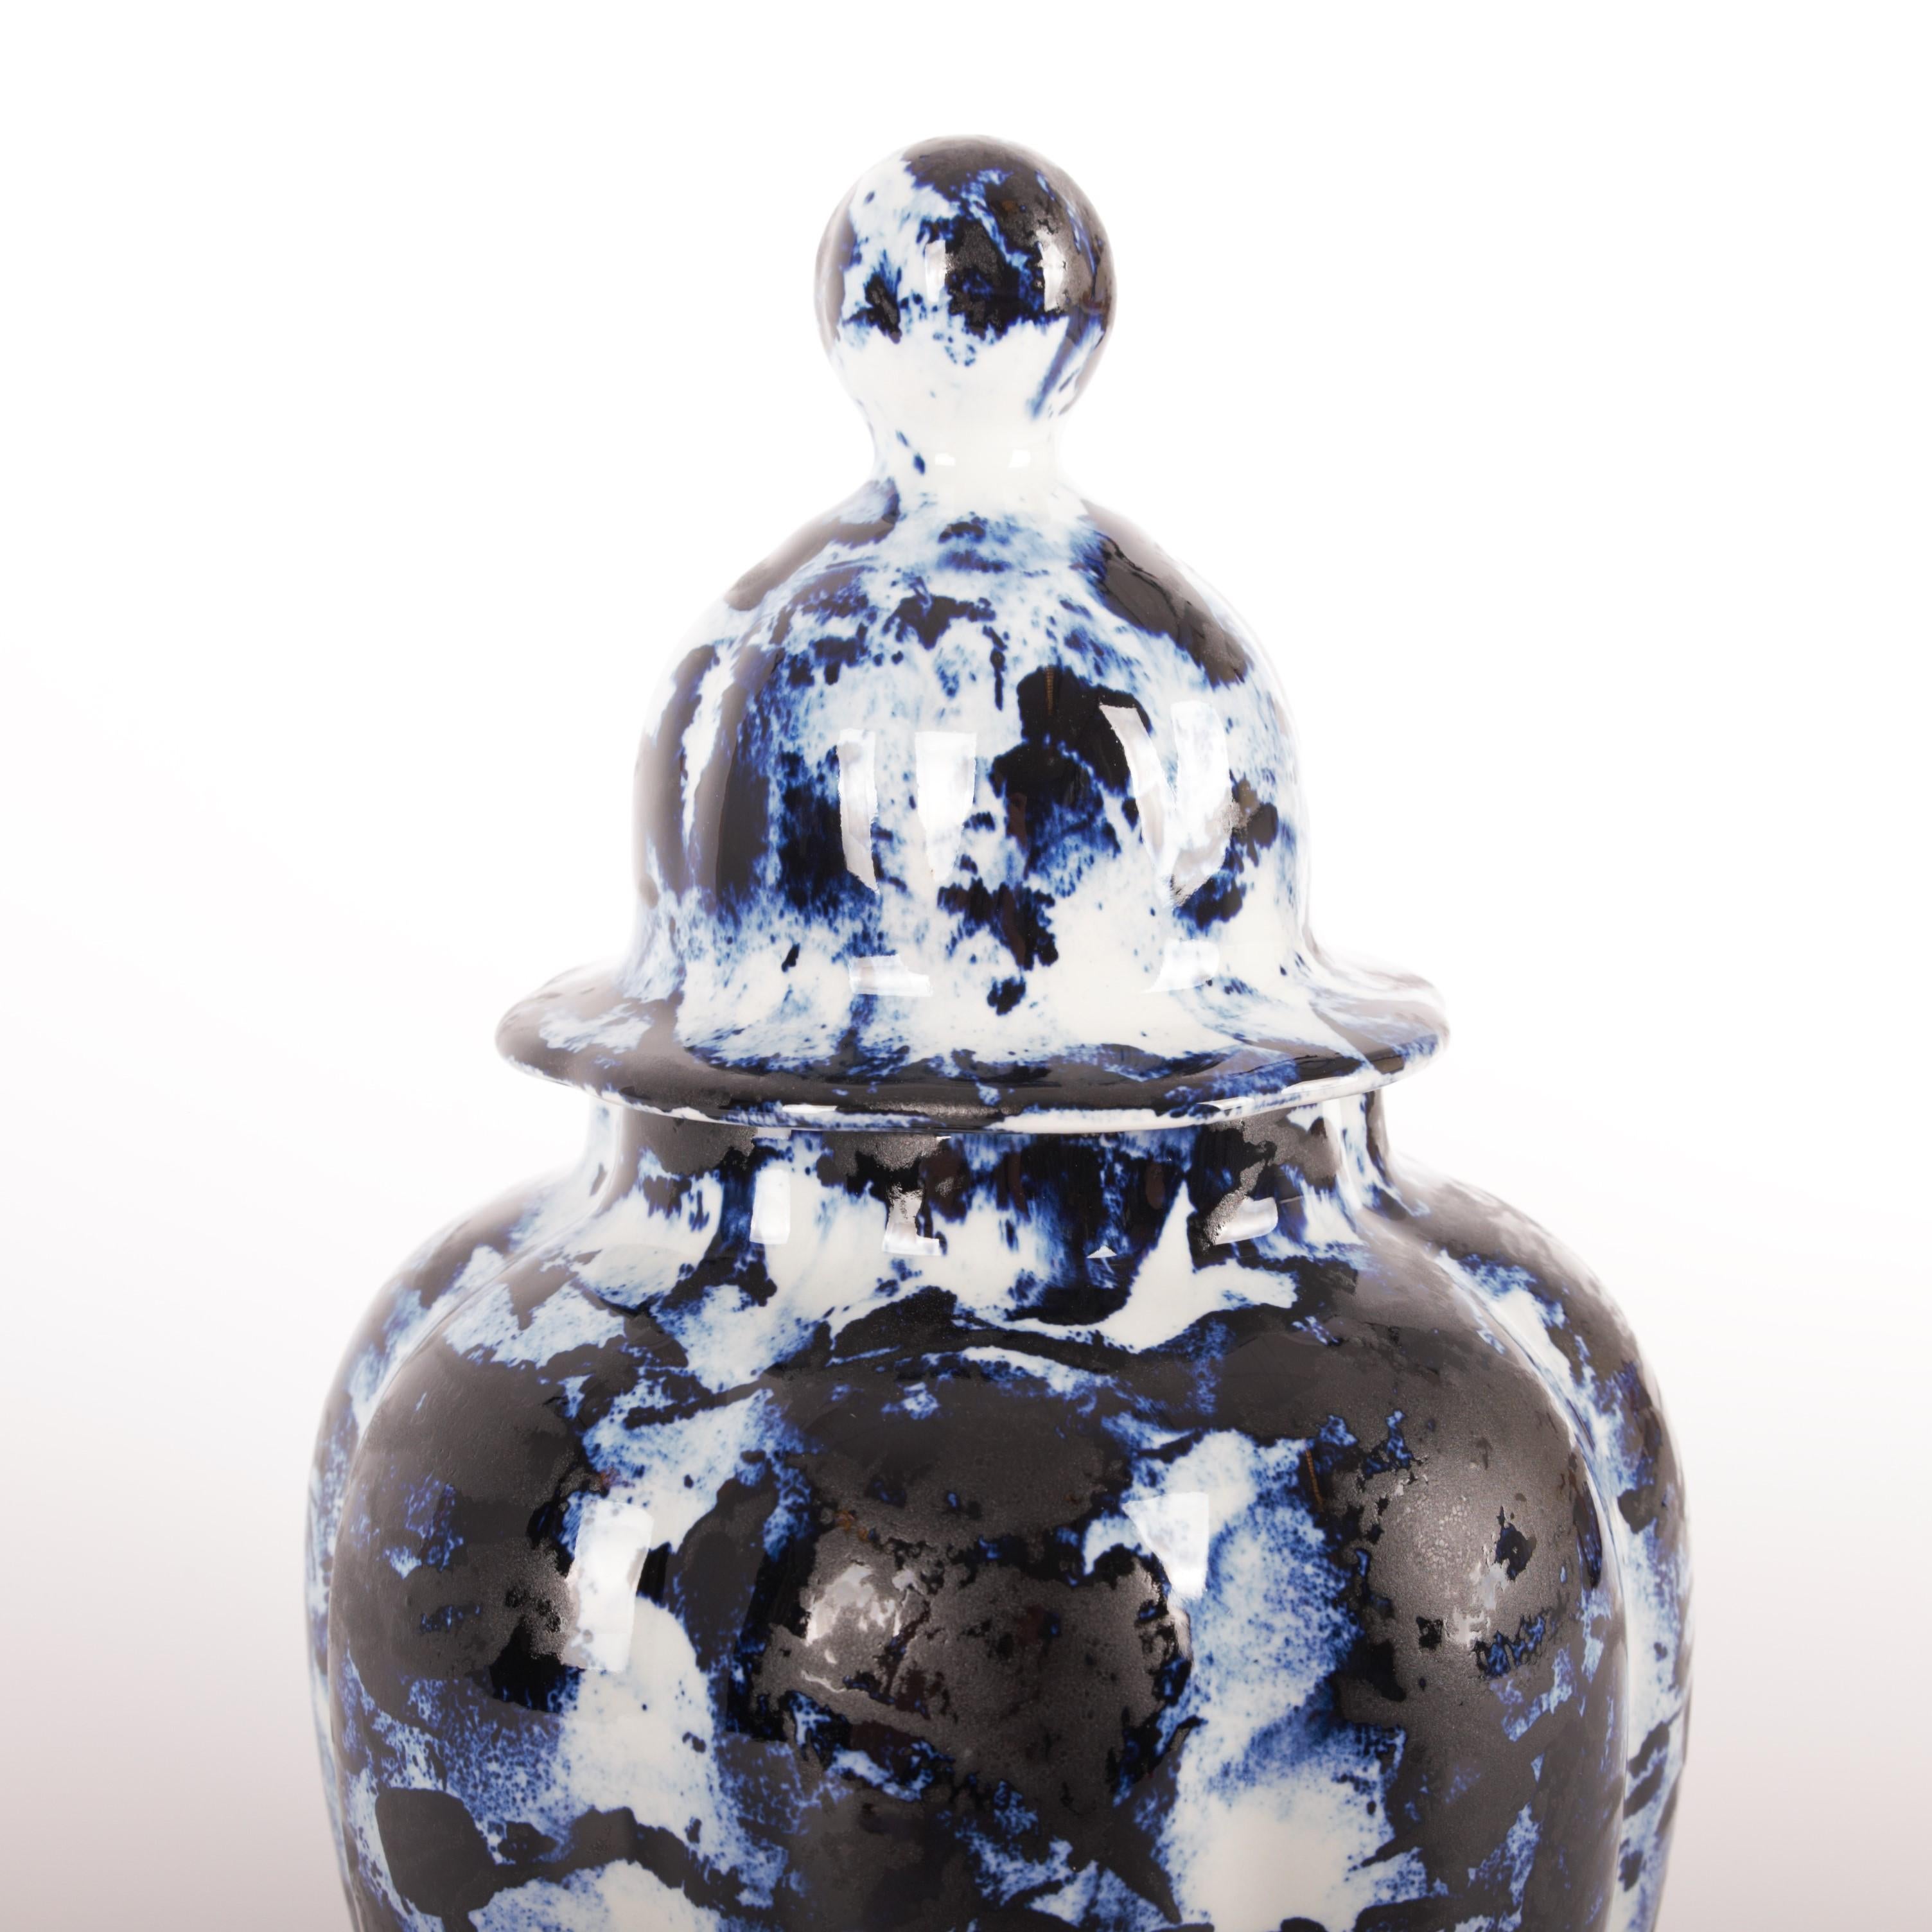 Contemporary Delft Blue Vase with Lid #2, by Marcel Wanders, Hand Painted, 2006, Unique For Sale